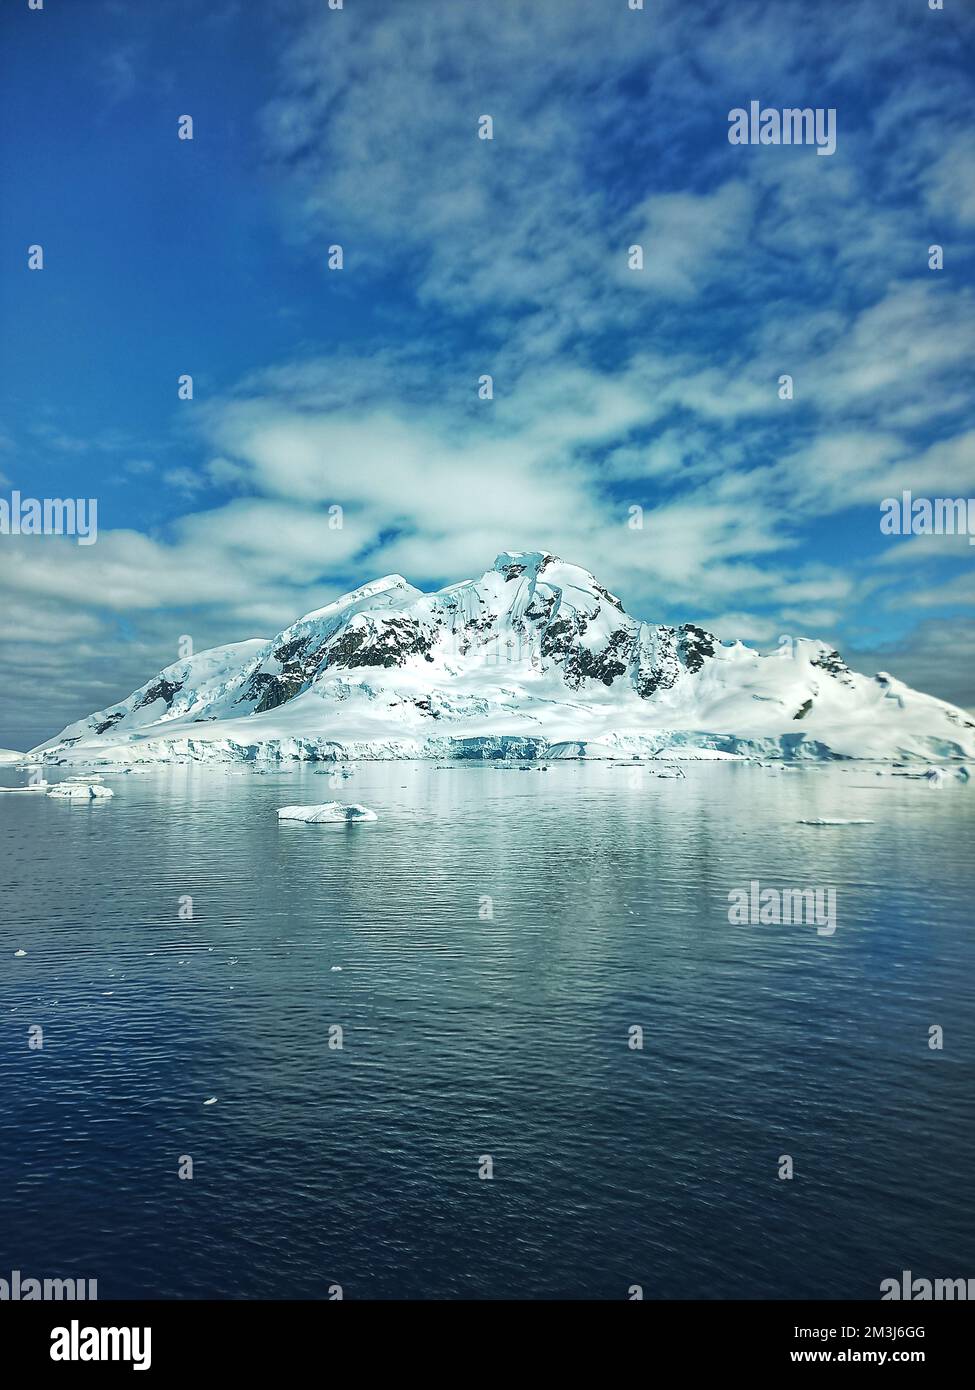 antarctica,antartica,antarctica landscape,nature,ice filled mountains,icy mountains,climate change,antactic peninsula,ice bergs Stock Photo